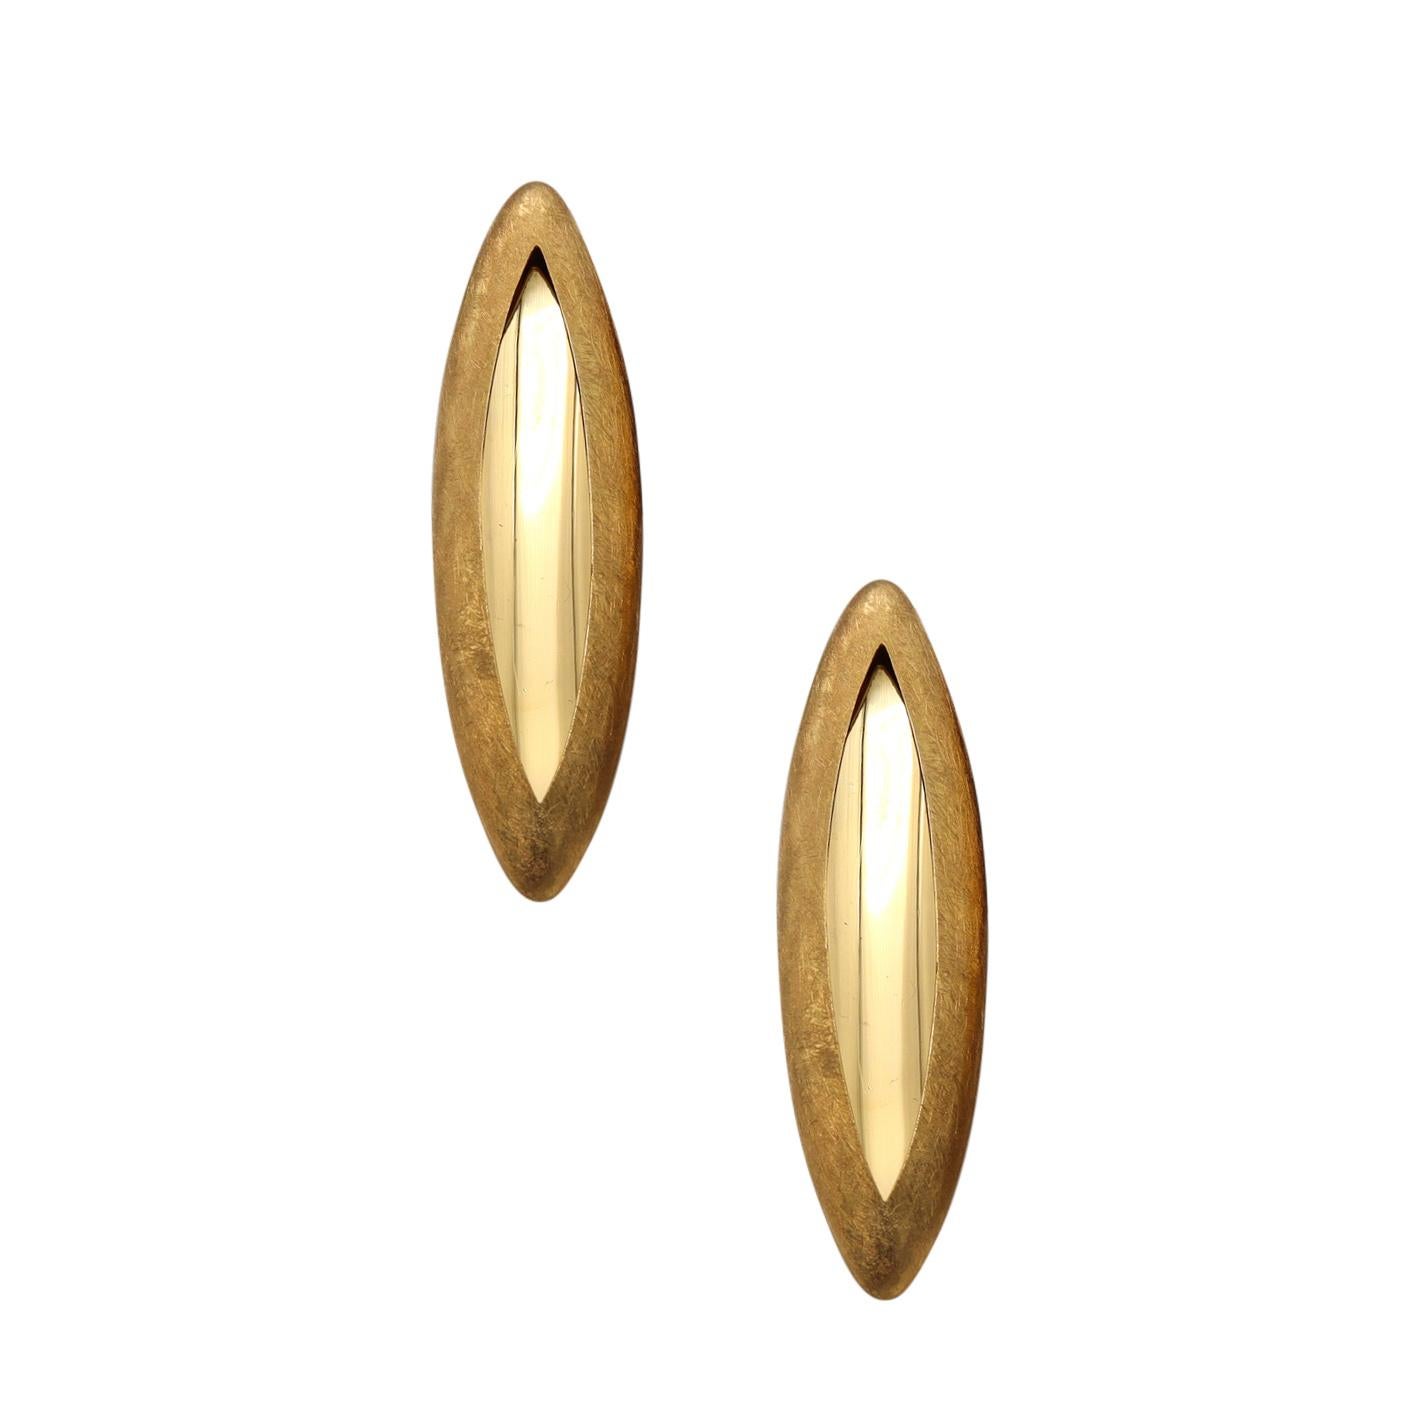 Anish Kapoor 2010 London Rare Pair of Sculptural Torpedo Earrings in 18Kt Gold For Sale 2